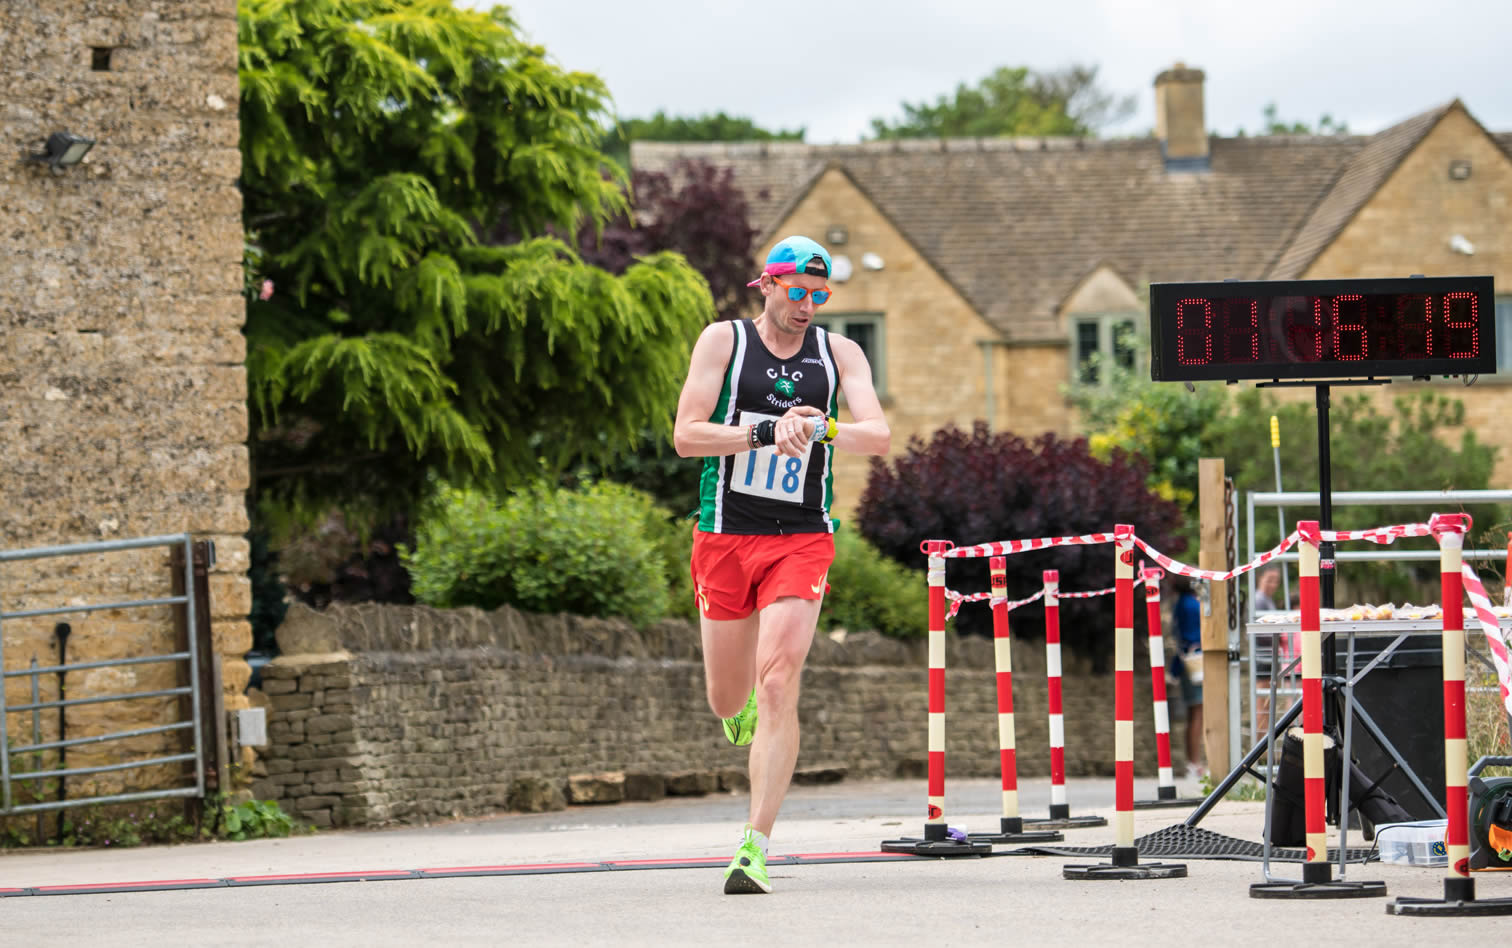 Joe Willcoss of CLC Striders finished 2nd place at the Bourton Half - 2-07-2023